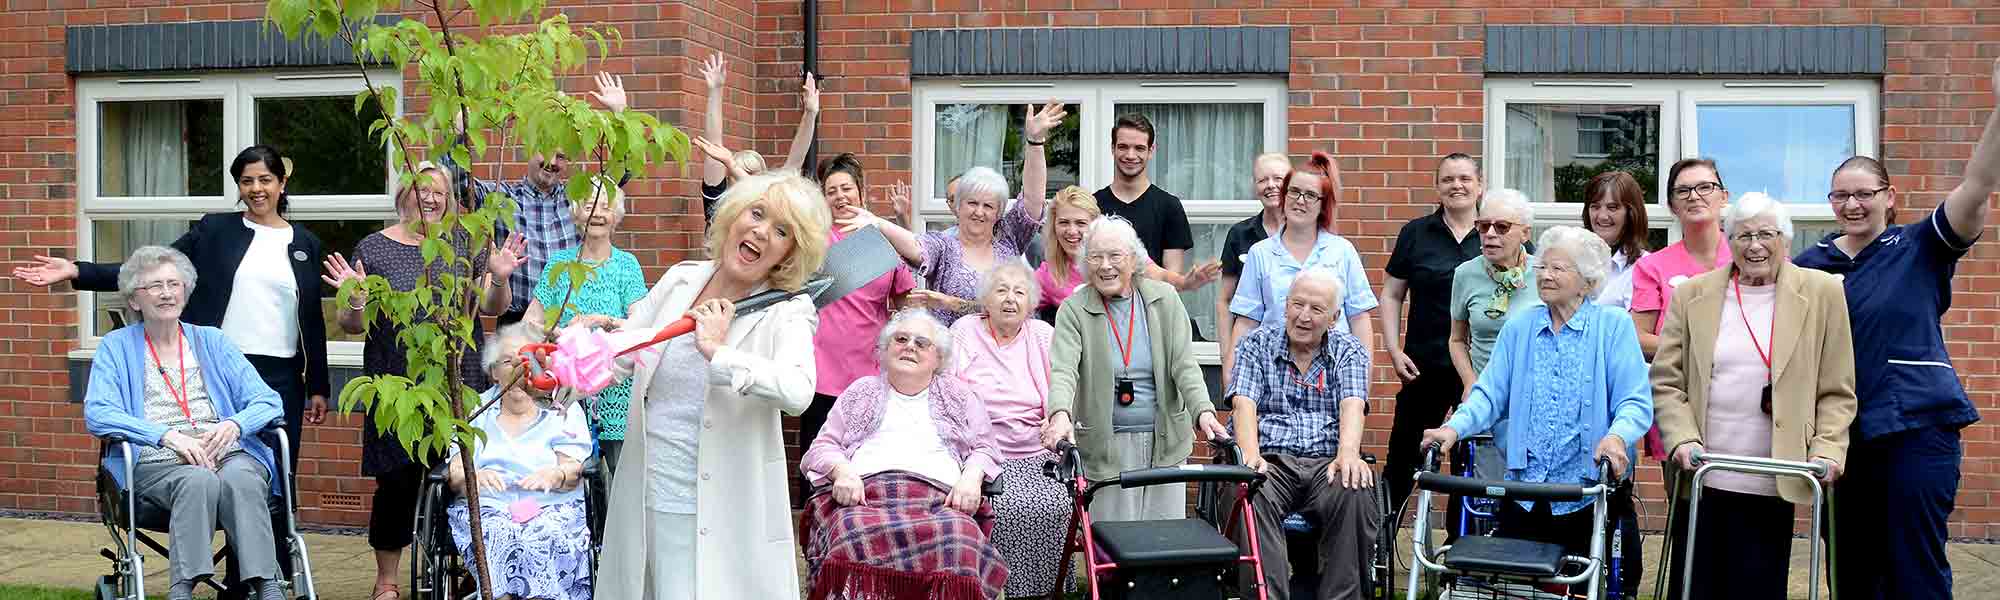 Sherrie Hewson with staff and residents from Acorn Lodge Care Home